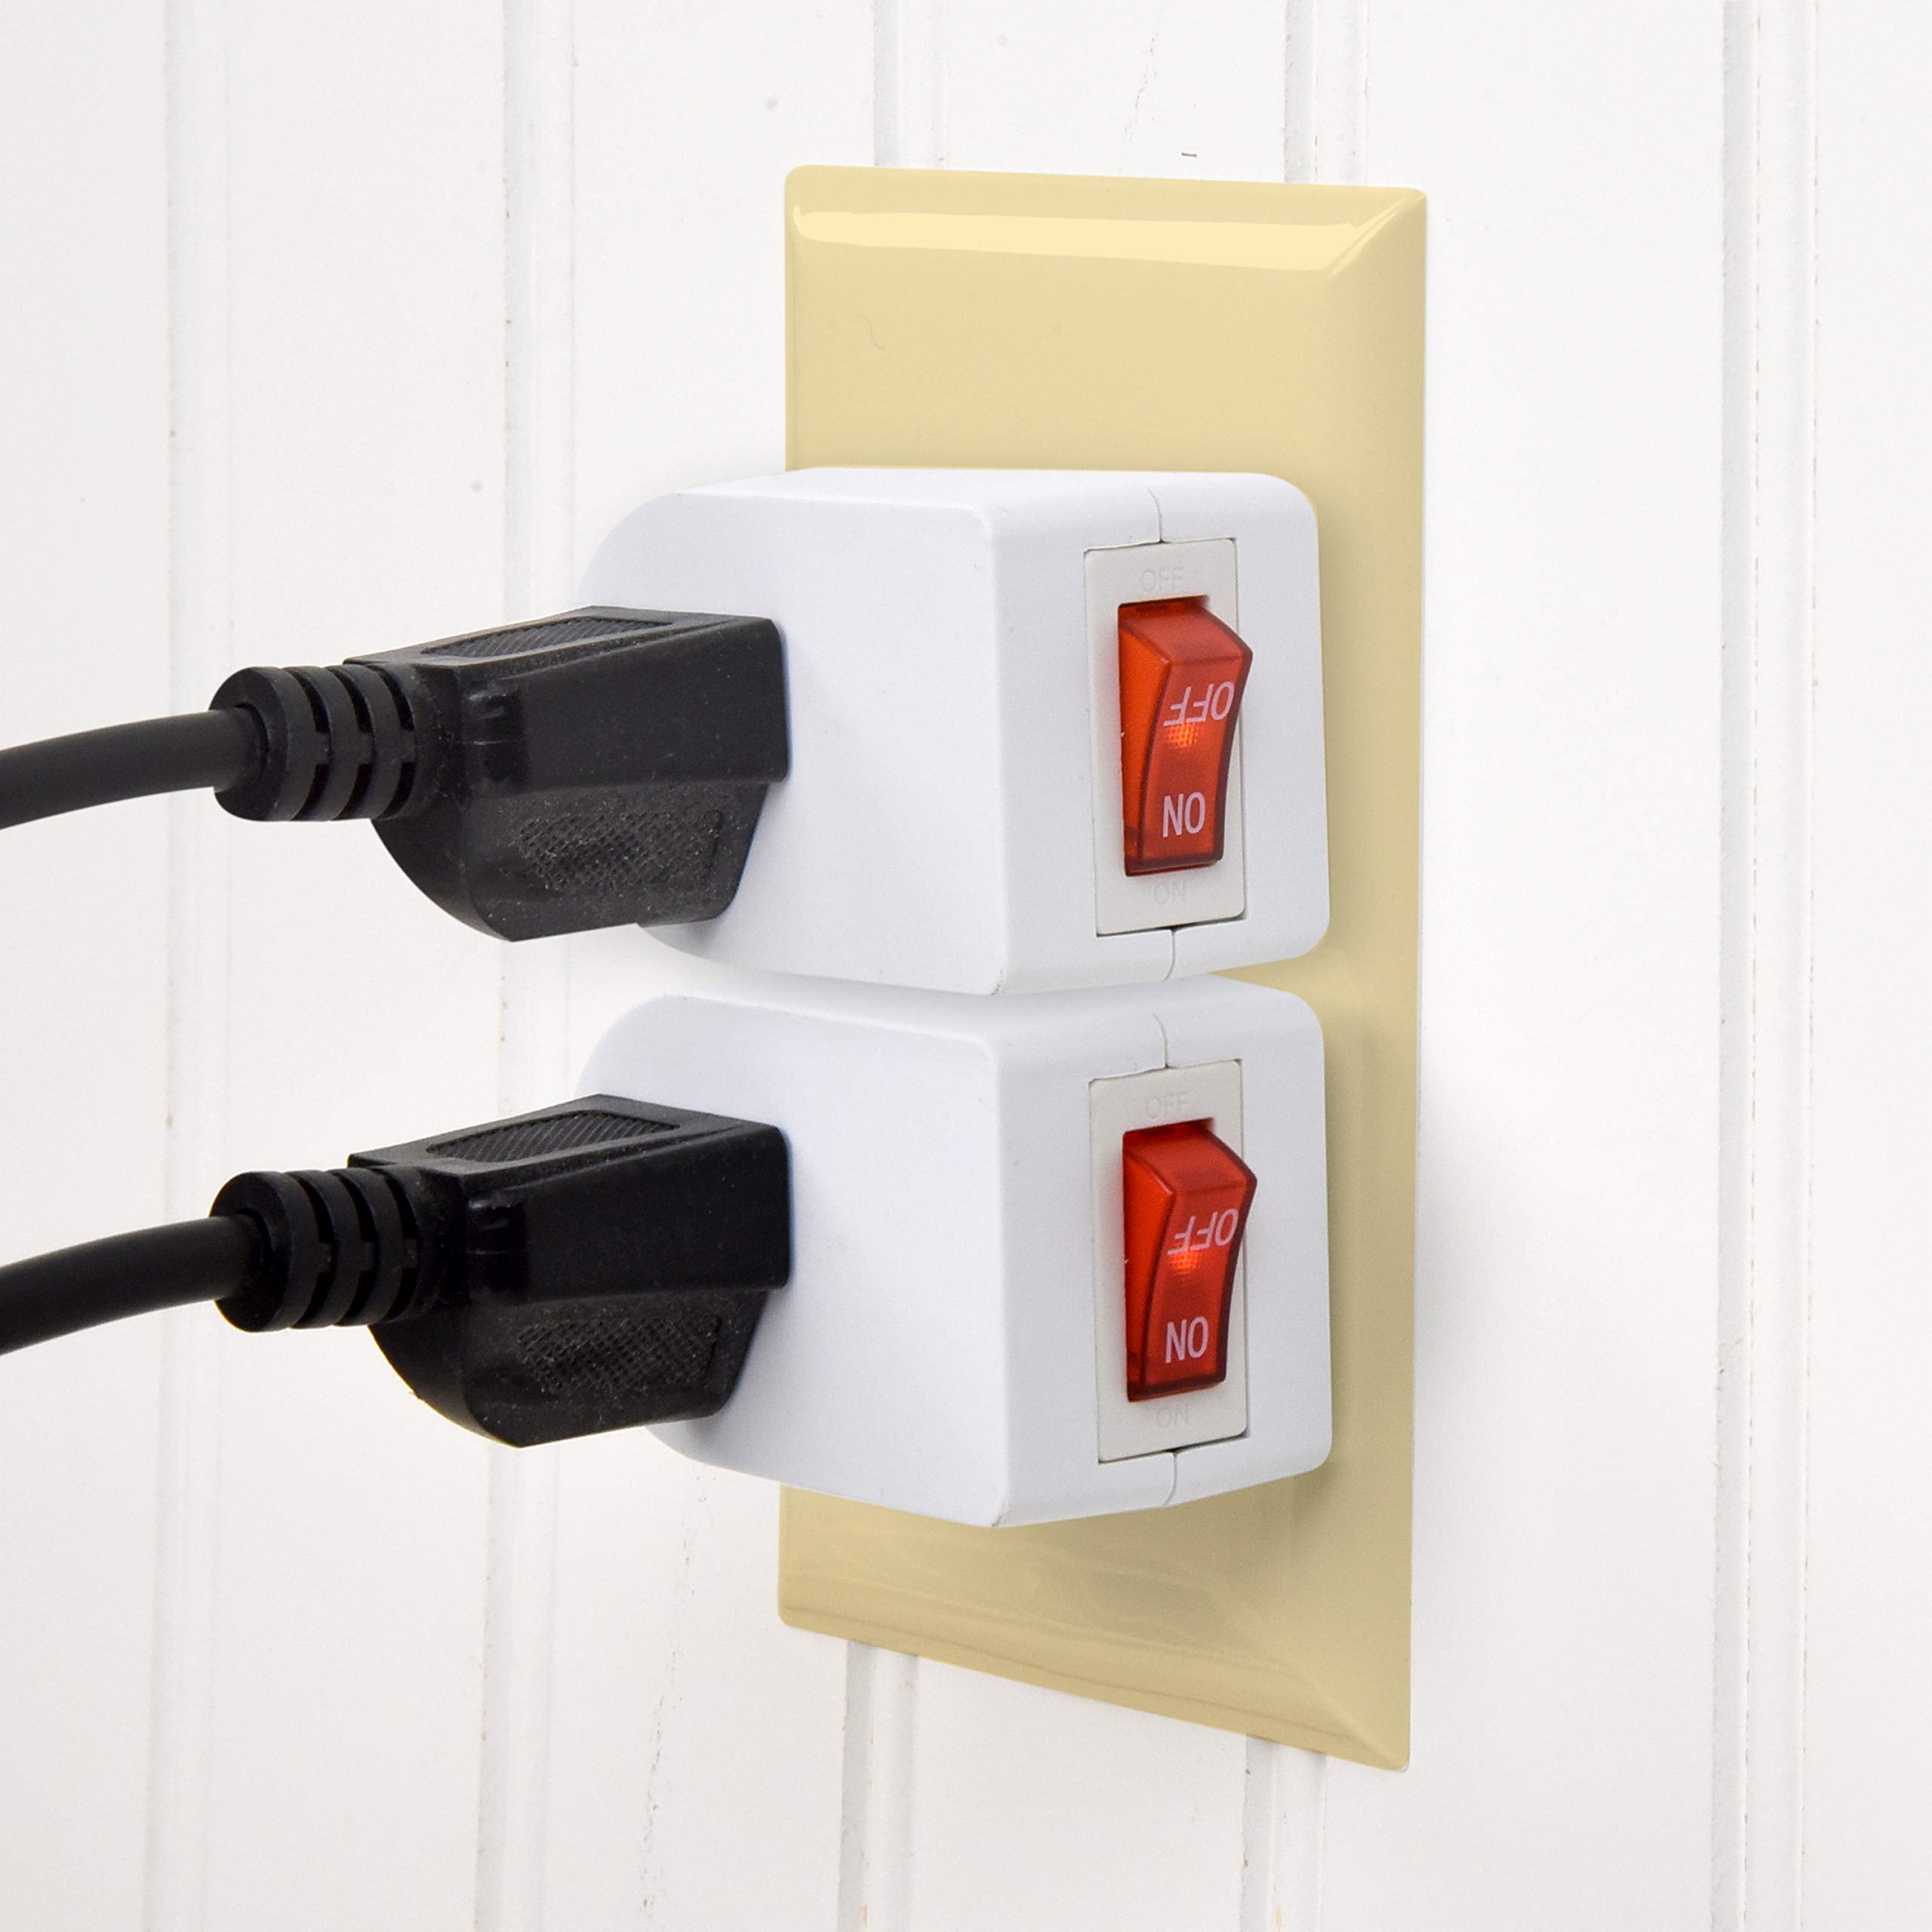 Electes 3 Prong Grounded Single Port Power Adapter with Red Indicator On/Off switch {Value! 3 Pack}  - Like New